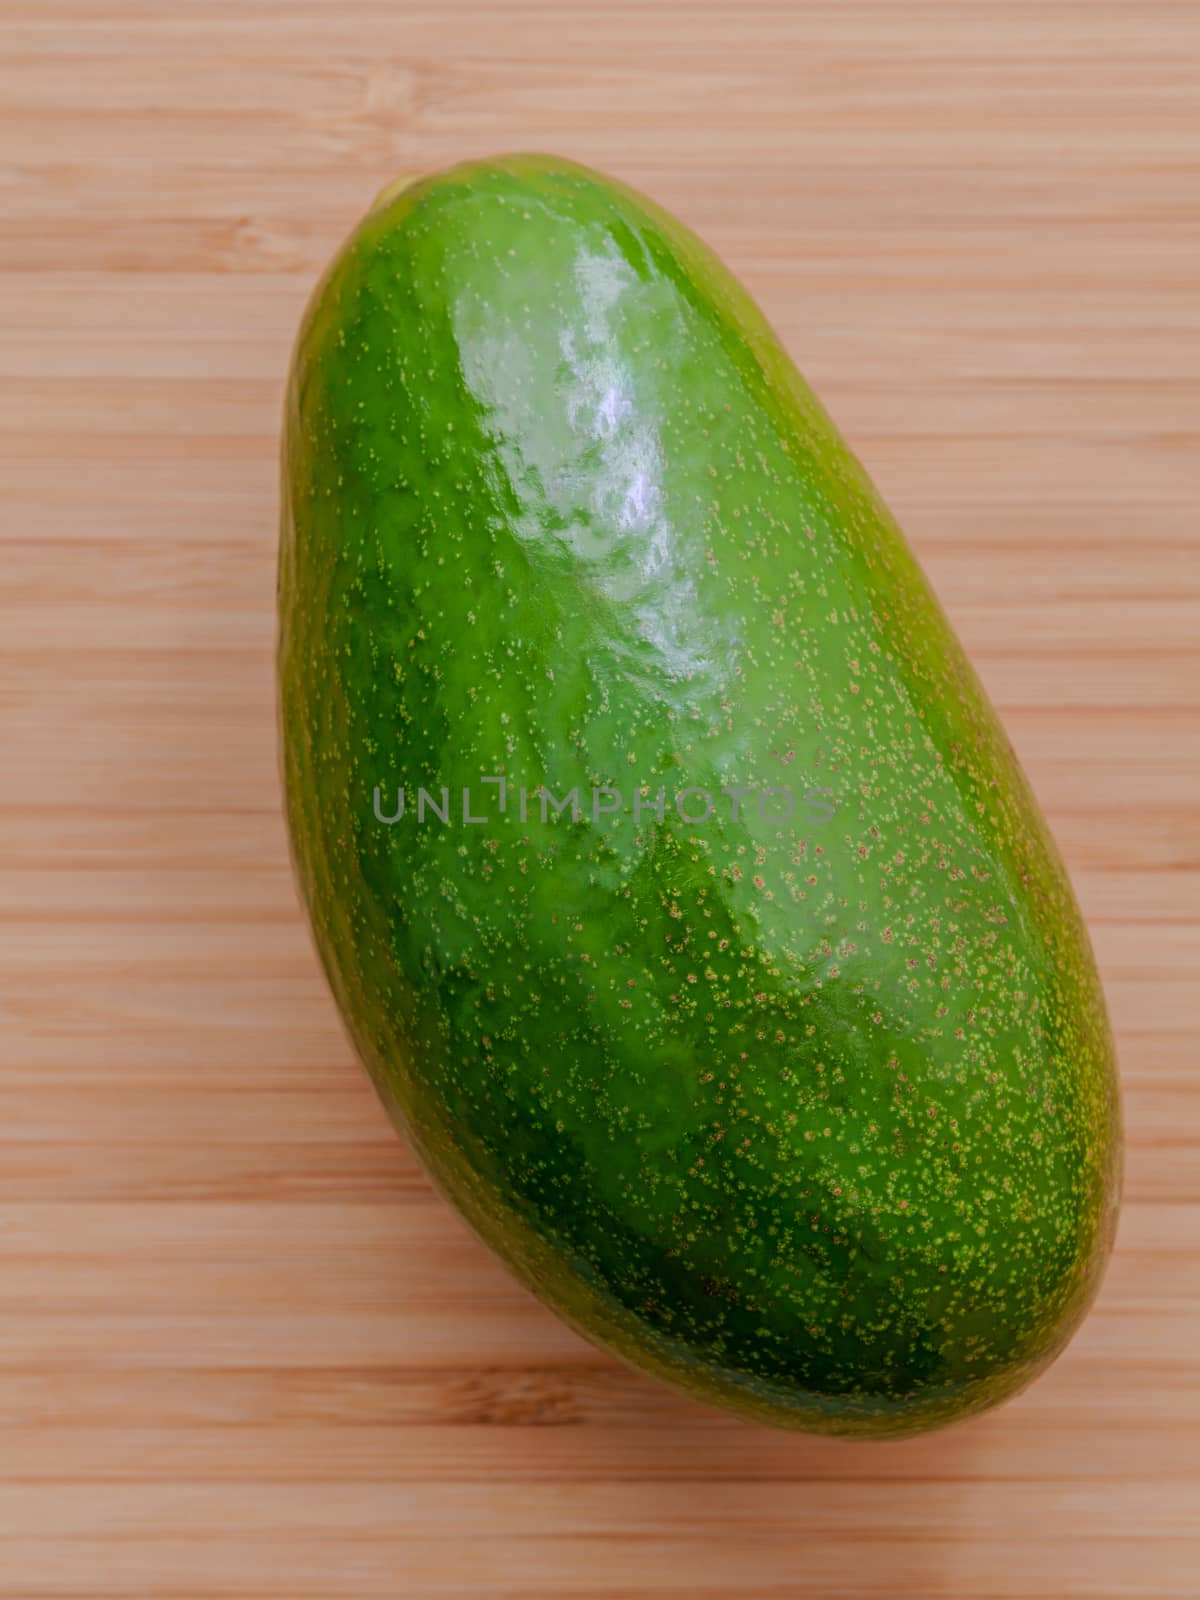 Fresh avocado on wooden background. Organic avocado healthy food concept.
 Avocado on Bamboo cutting board.The avocado is popular in vegetarian cuisine and weight control.